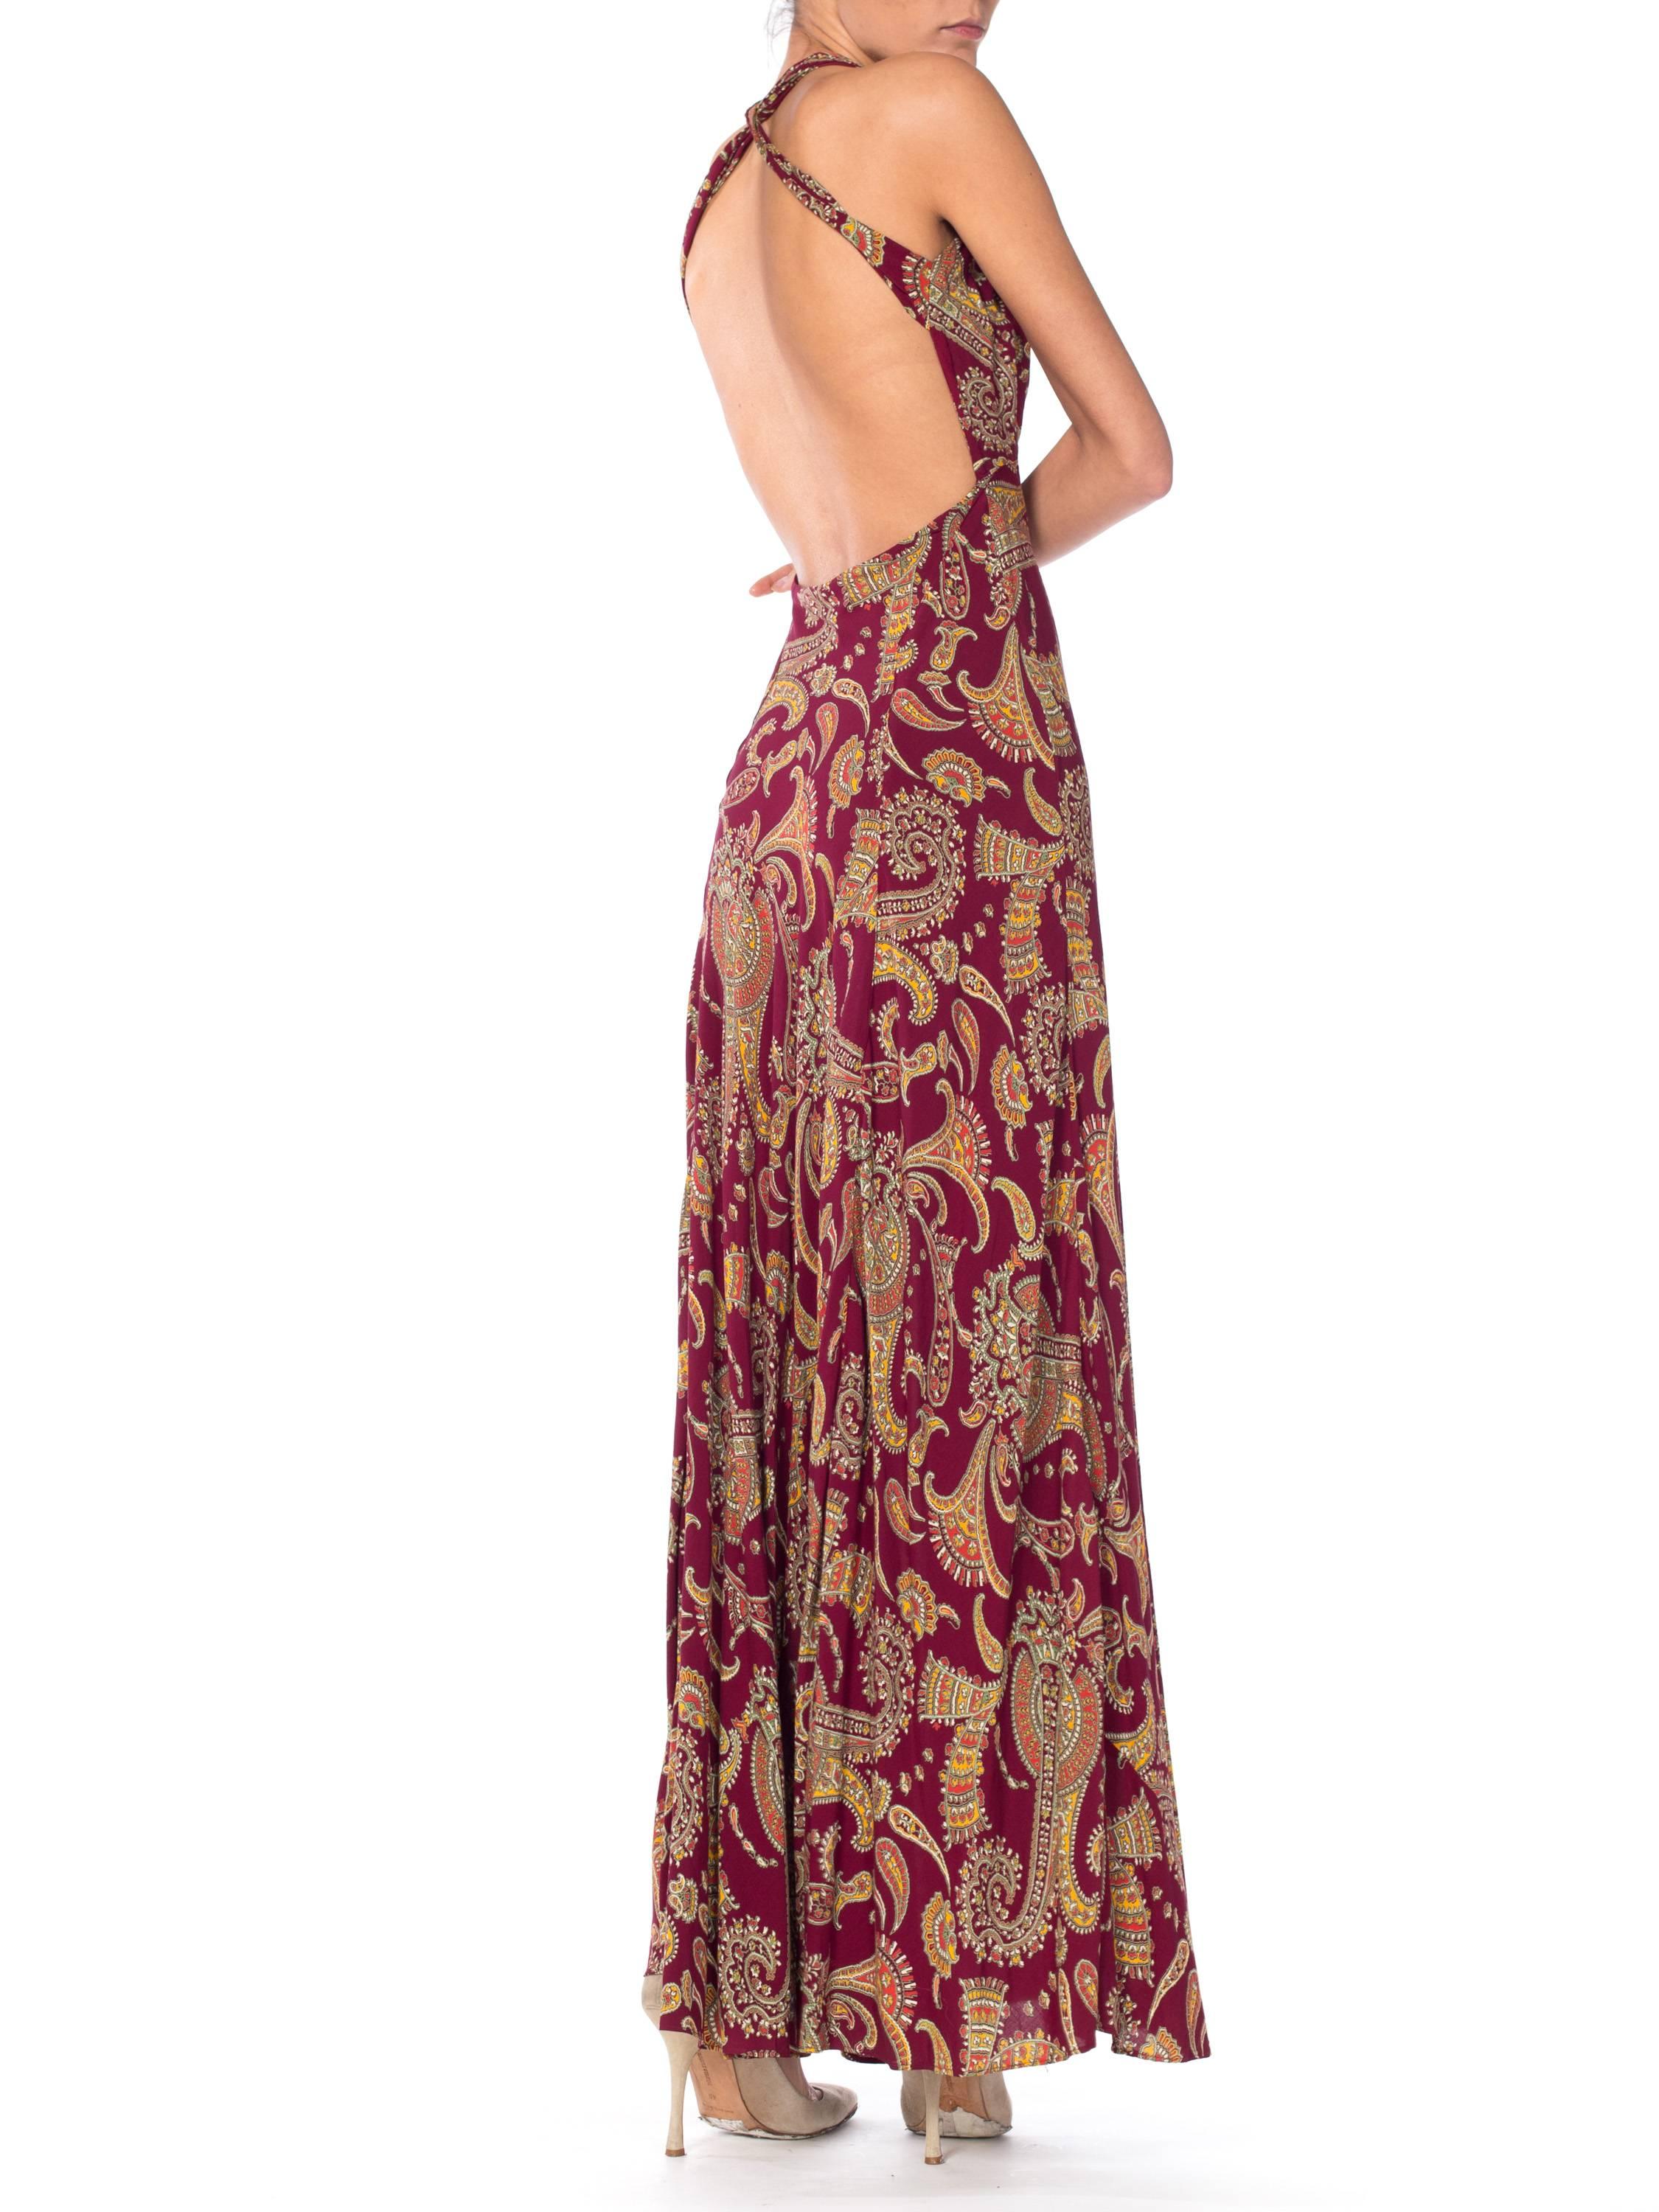 Women's 1930S Cranberry Red Paisley Rayon Backless Bias Cut Slip Dress For Sale